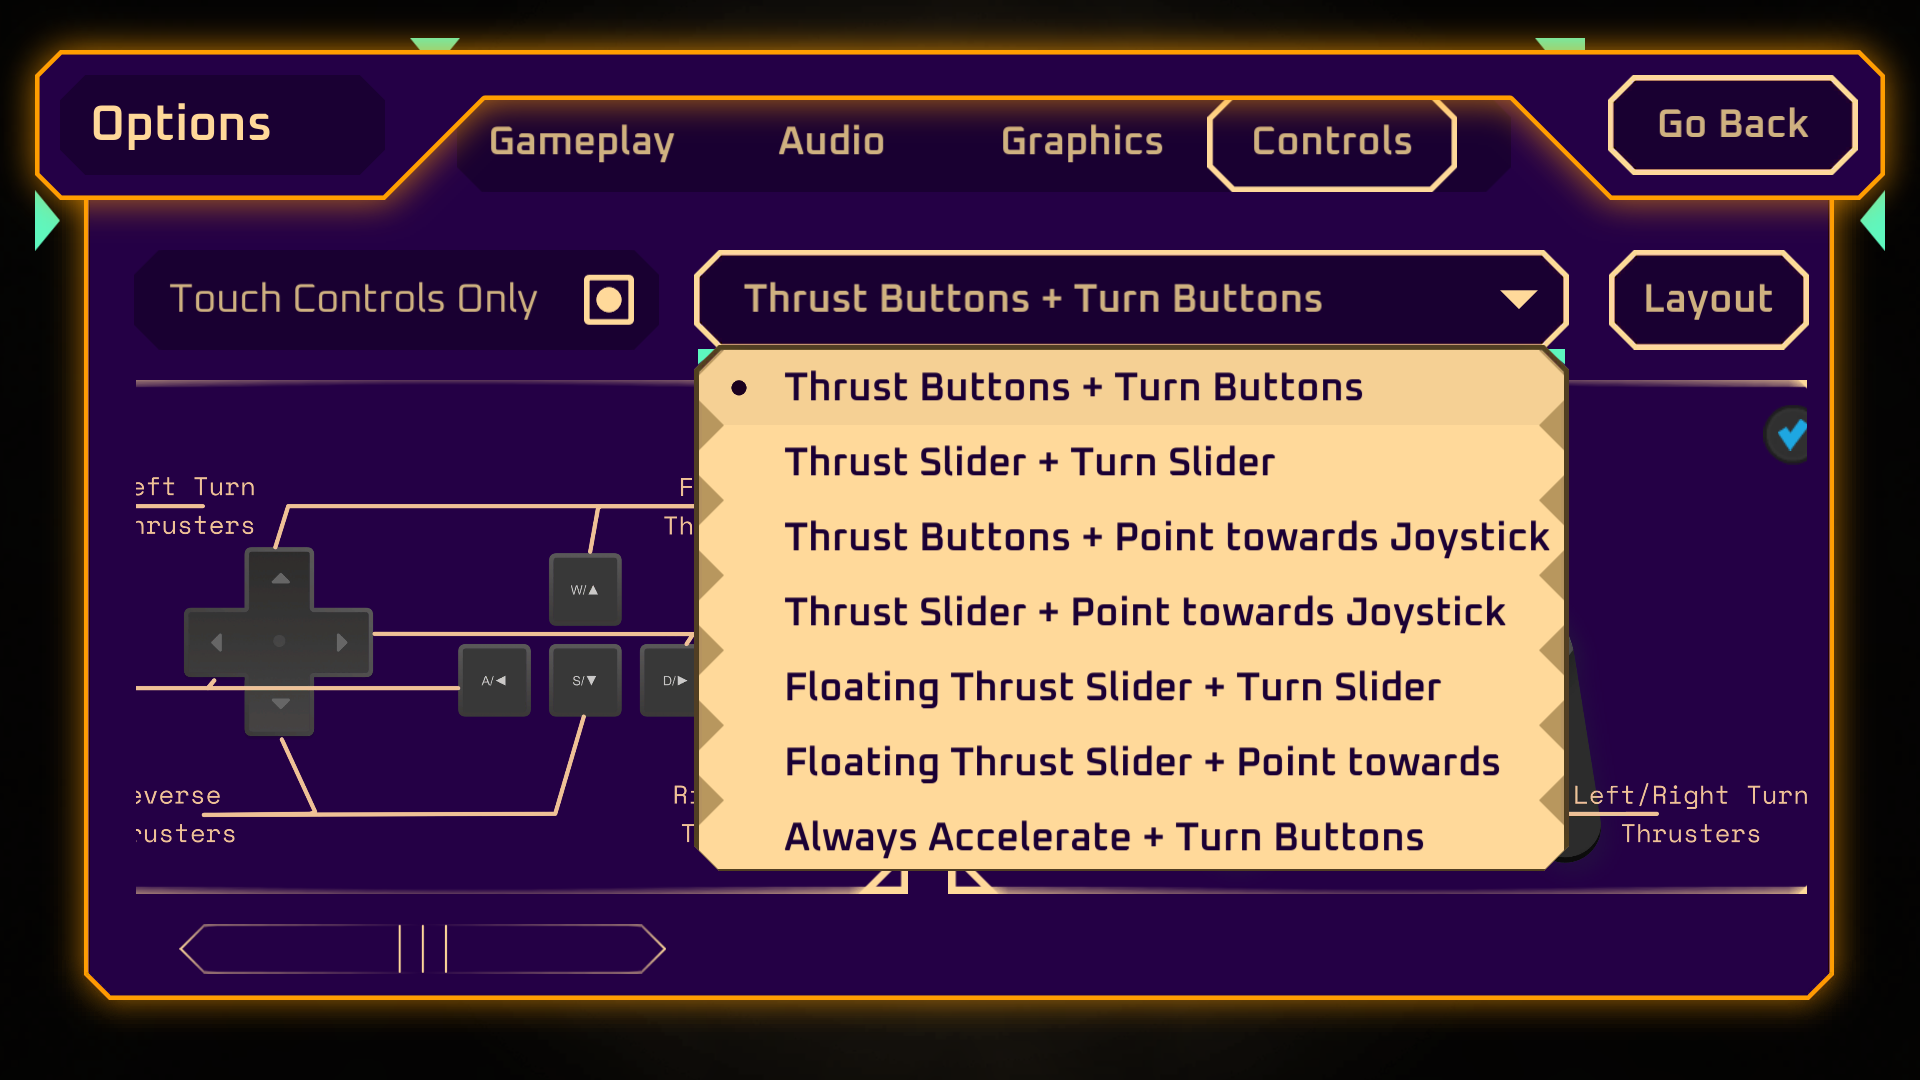 Touch Control Options